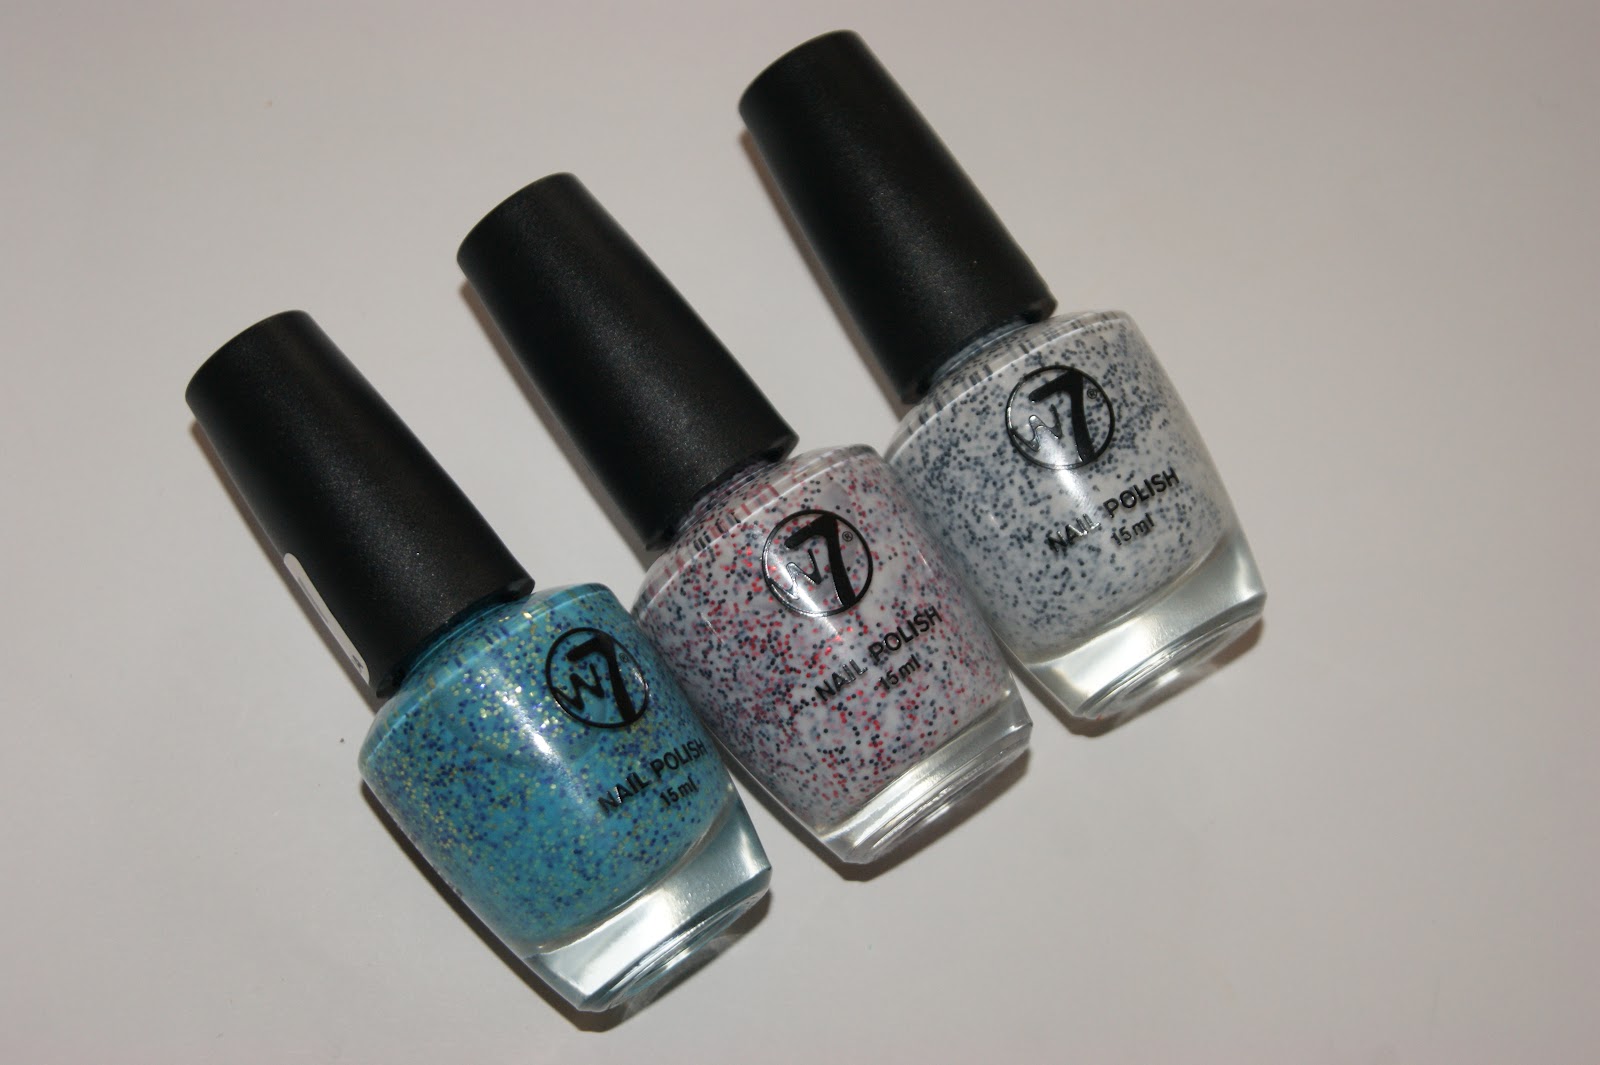 W7 New Glitter Polishes (Sprinkle Effect) - Review | The Sunday Girl | Nagellacke